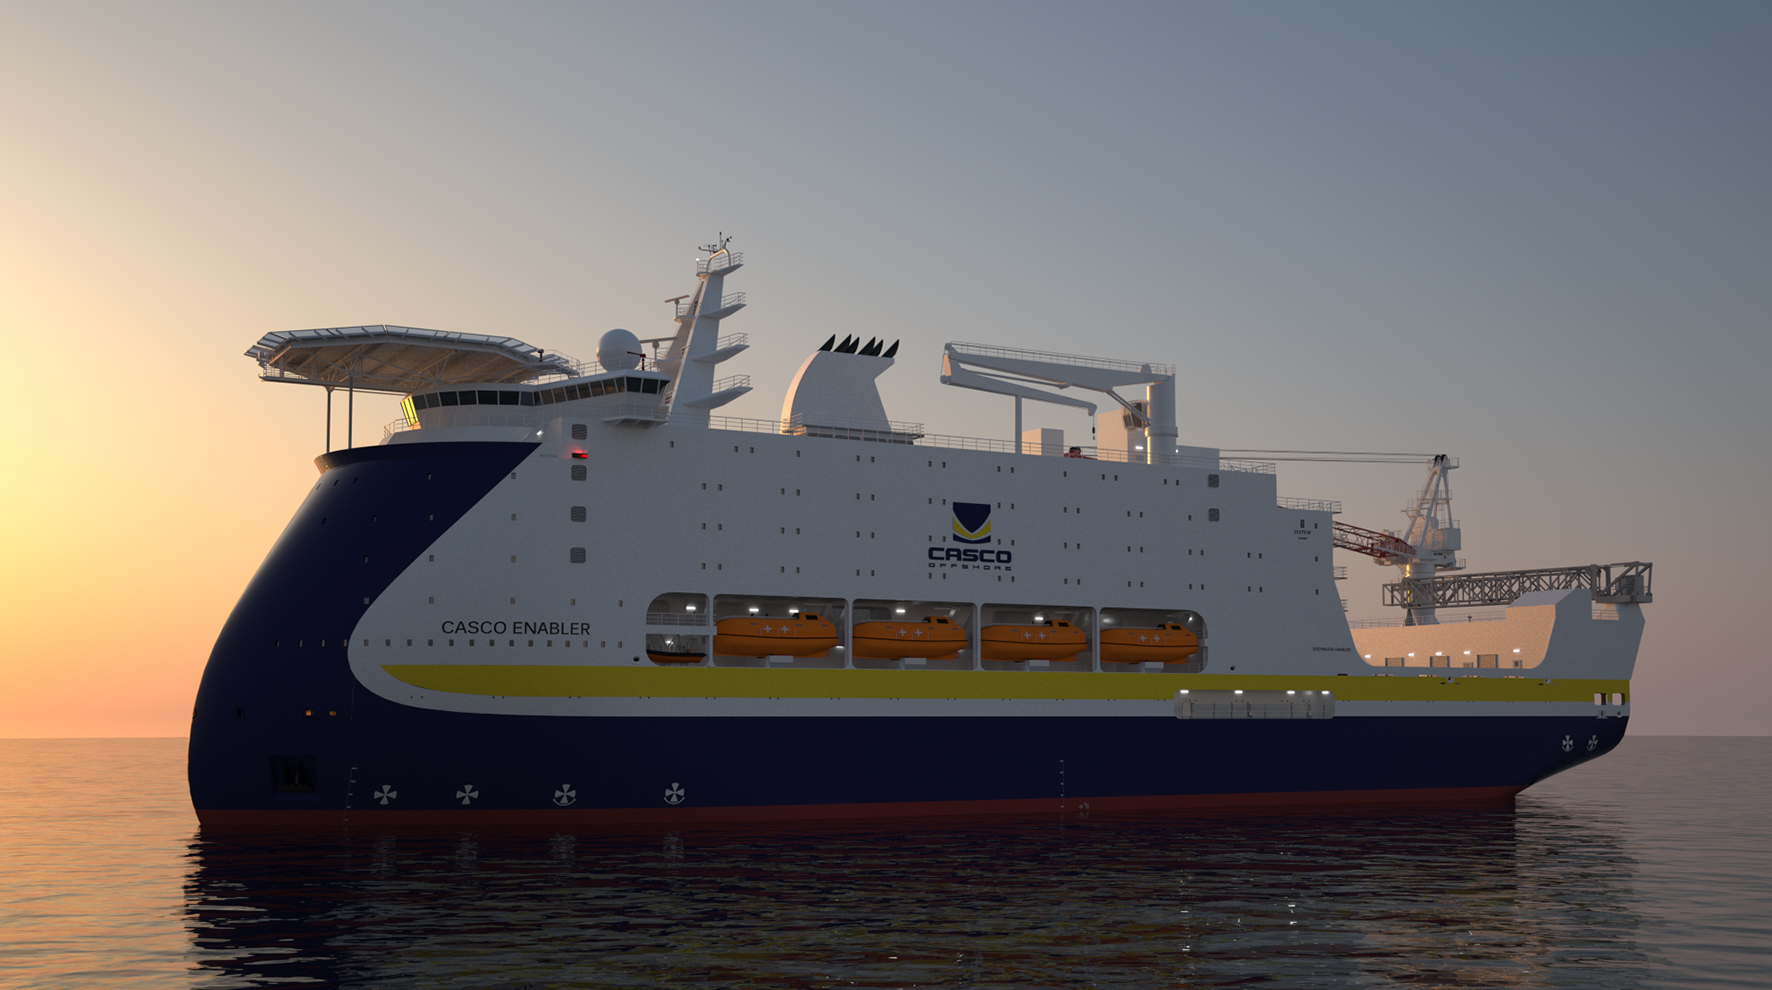 Ulstein to Design New Offshore Accommodation Vessel